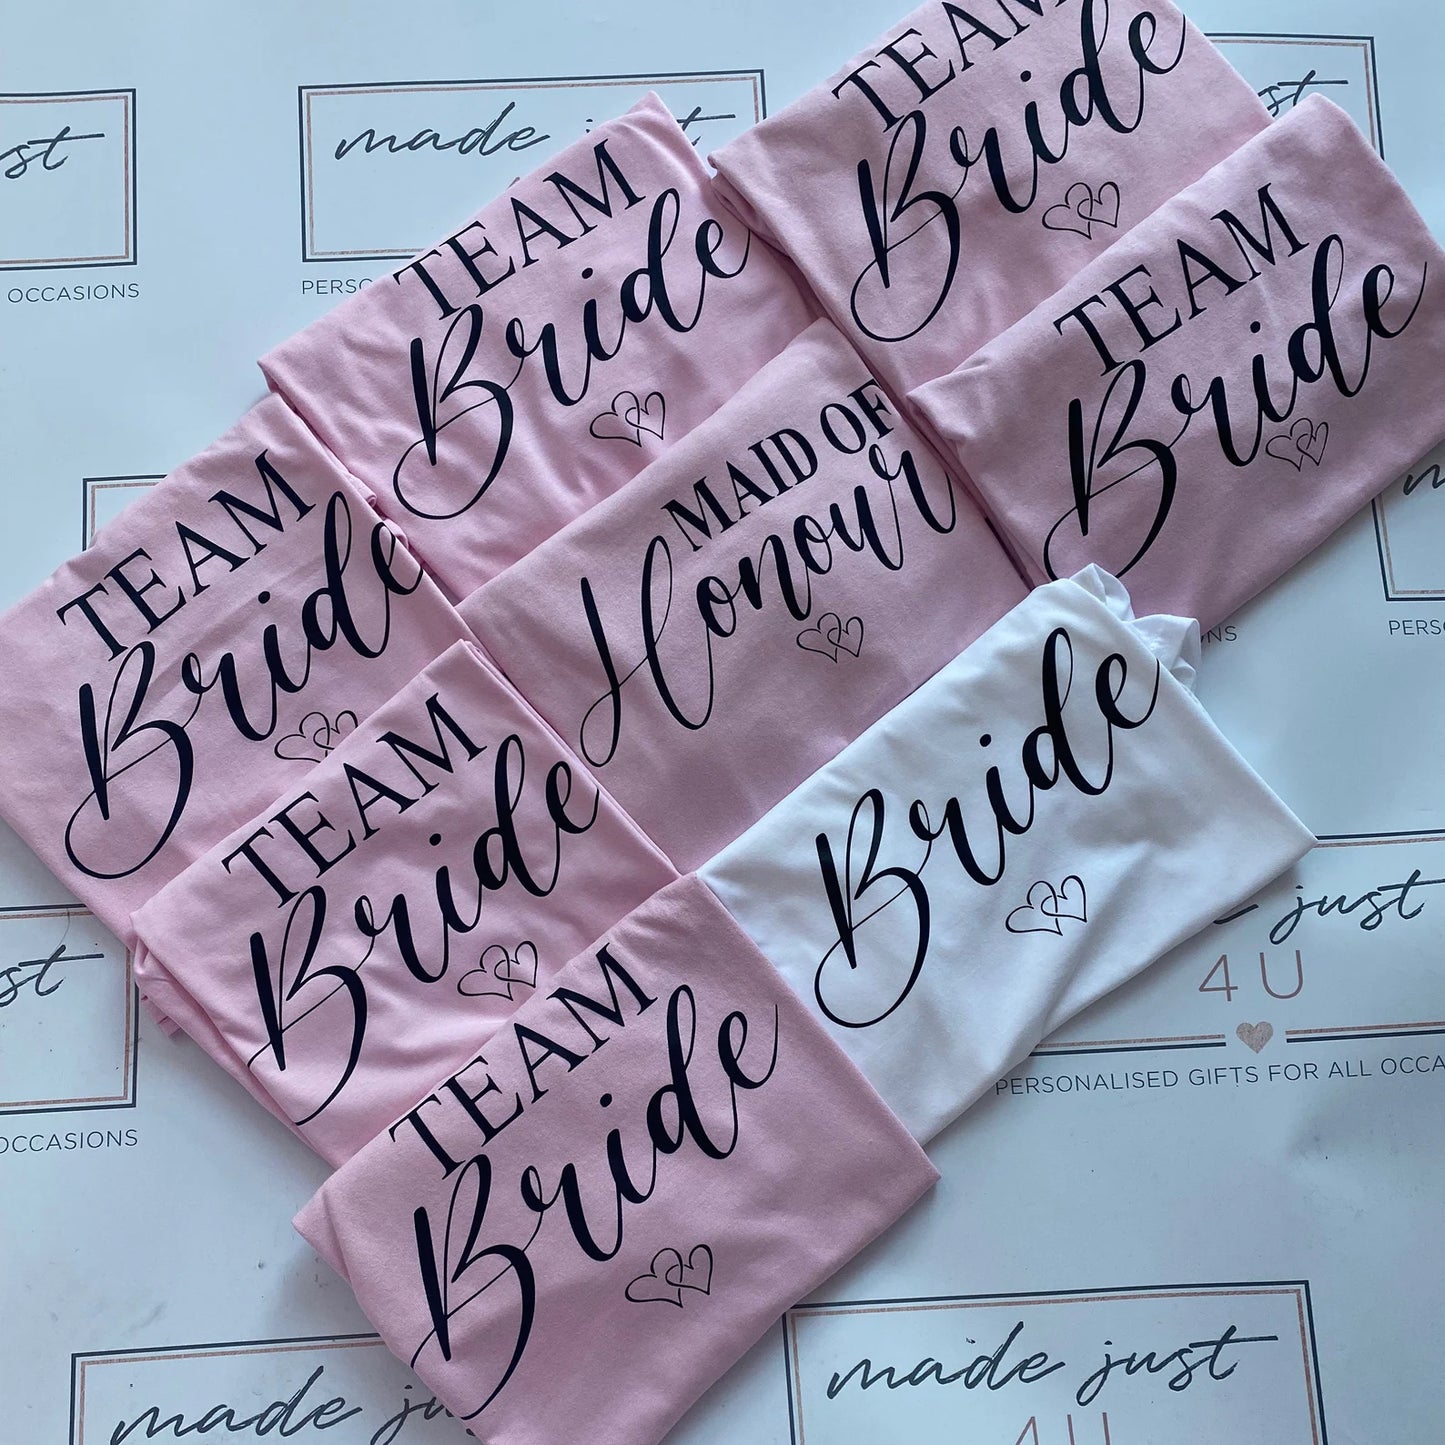 Personalised TEAM BRIDE Hen T-Shirts